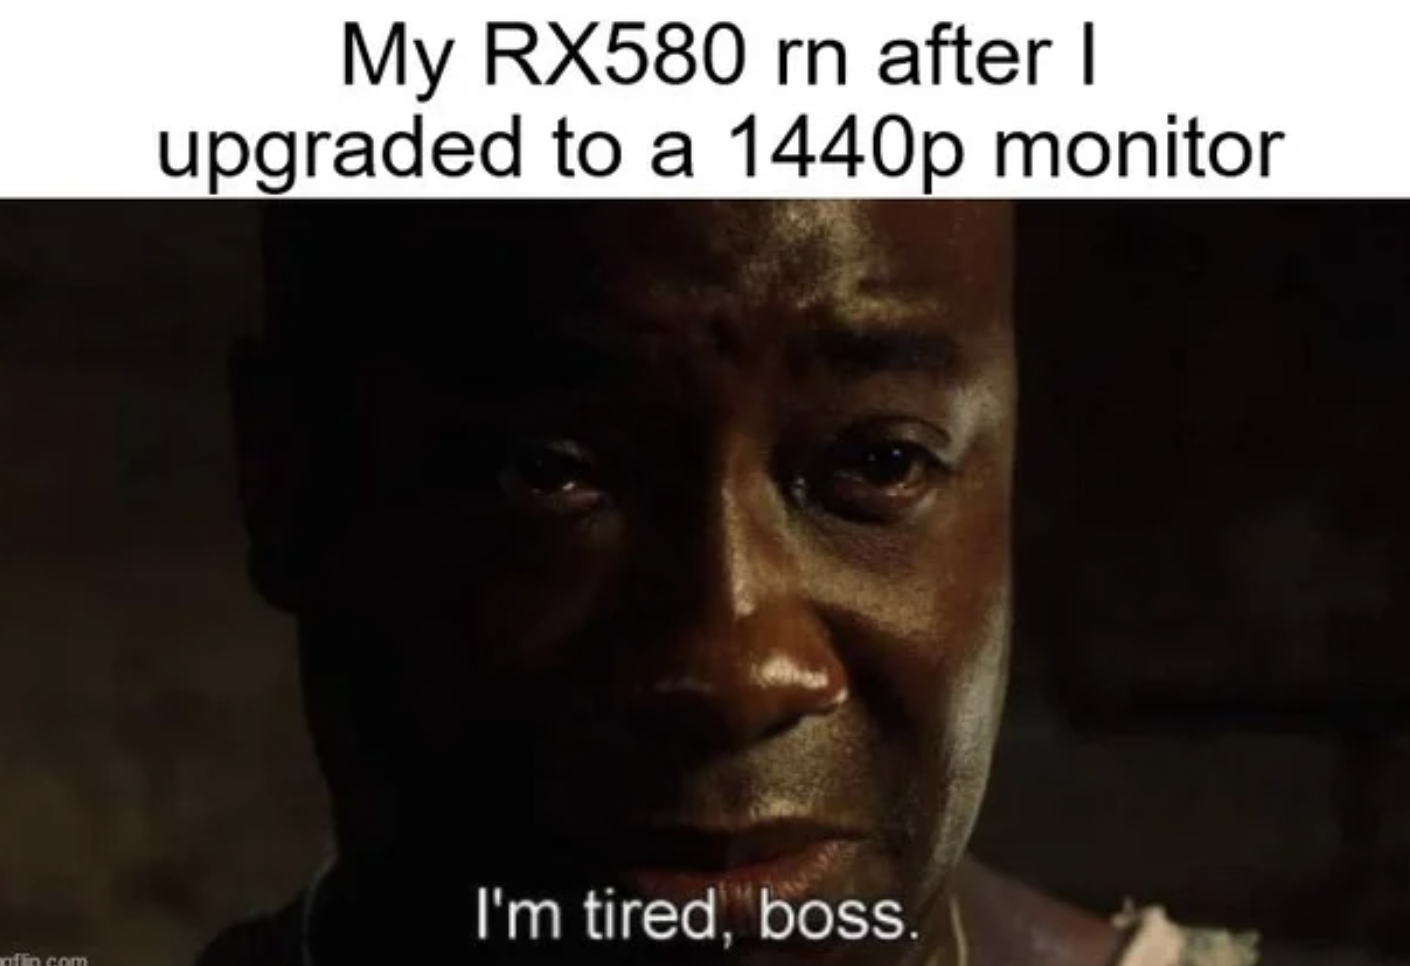 PC Gaming Memes - i m tired boss reddit -rn after I upgraded to a 1440p monitor I'm tired, boss.